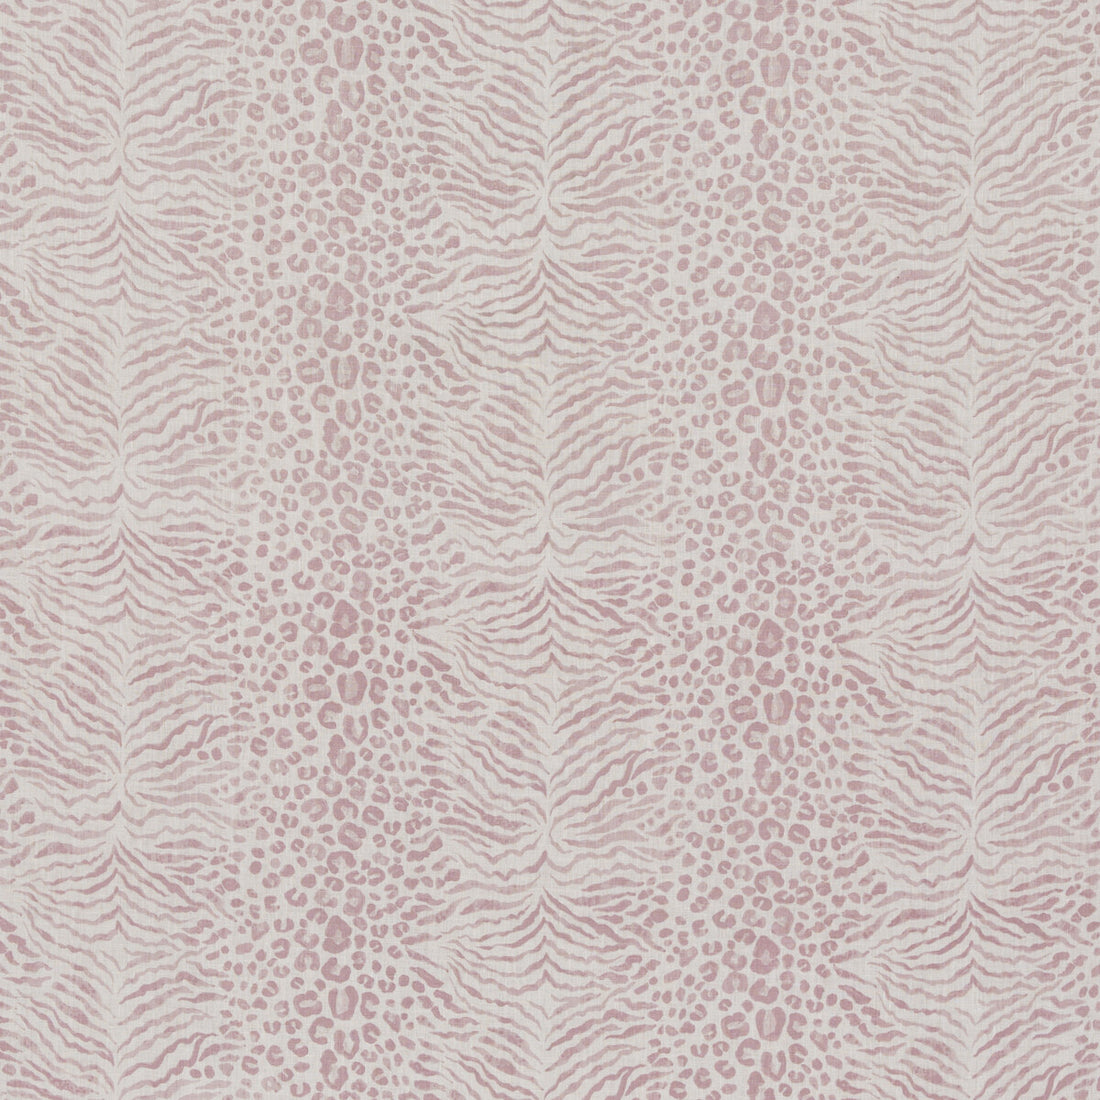 Chatto fabric in blush color - pattern BP10952.440.0 - by G P &amp; J Baker in the Ashmore collection